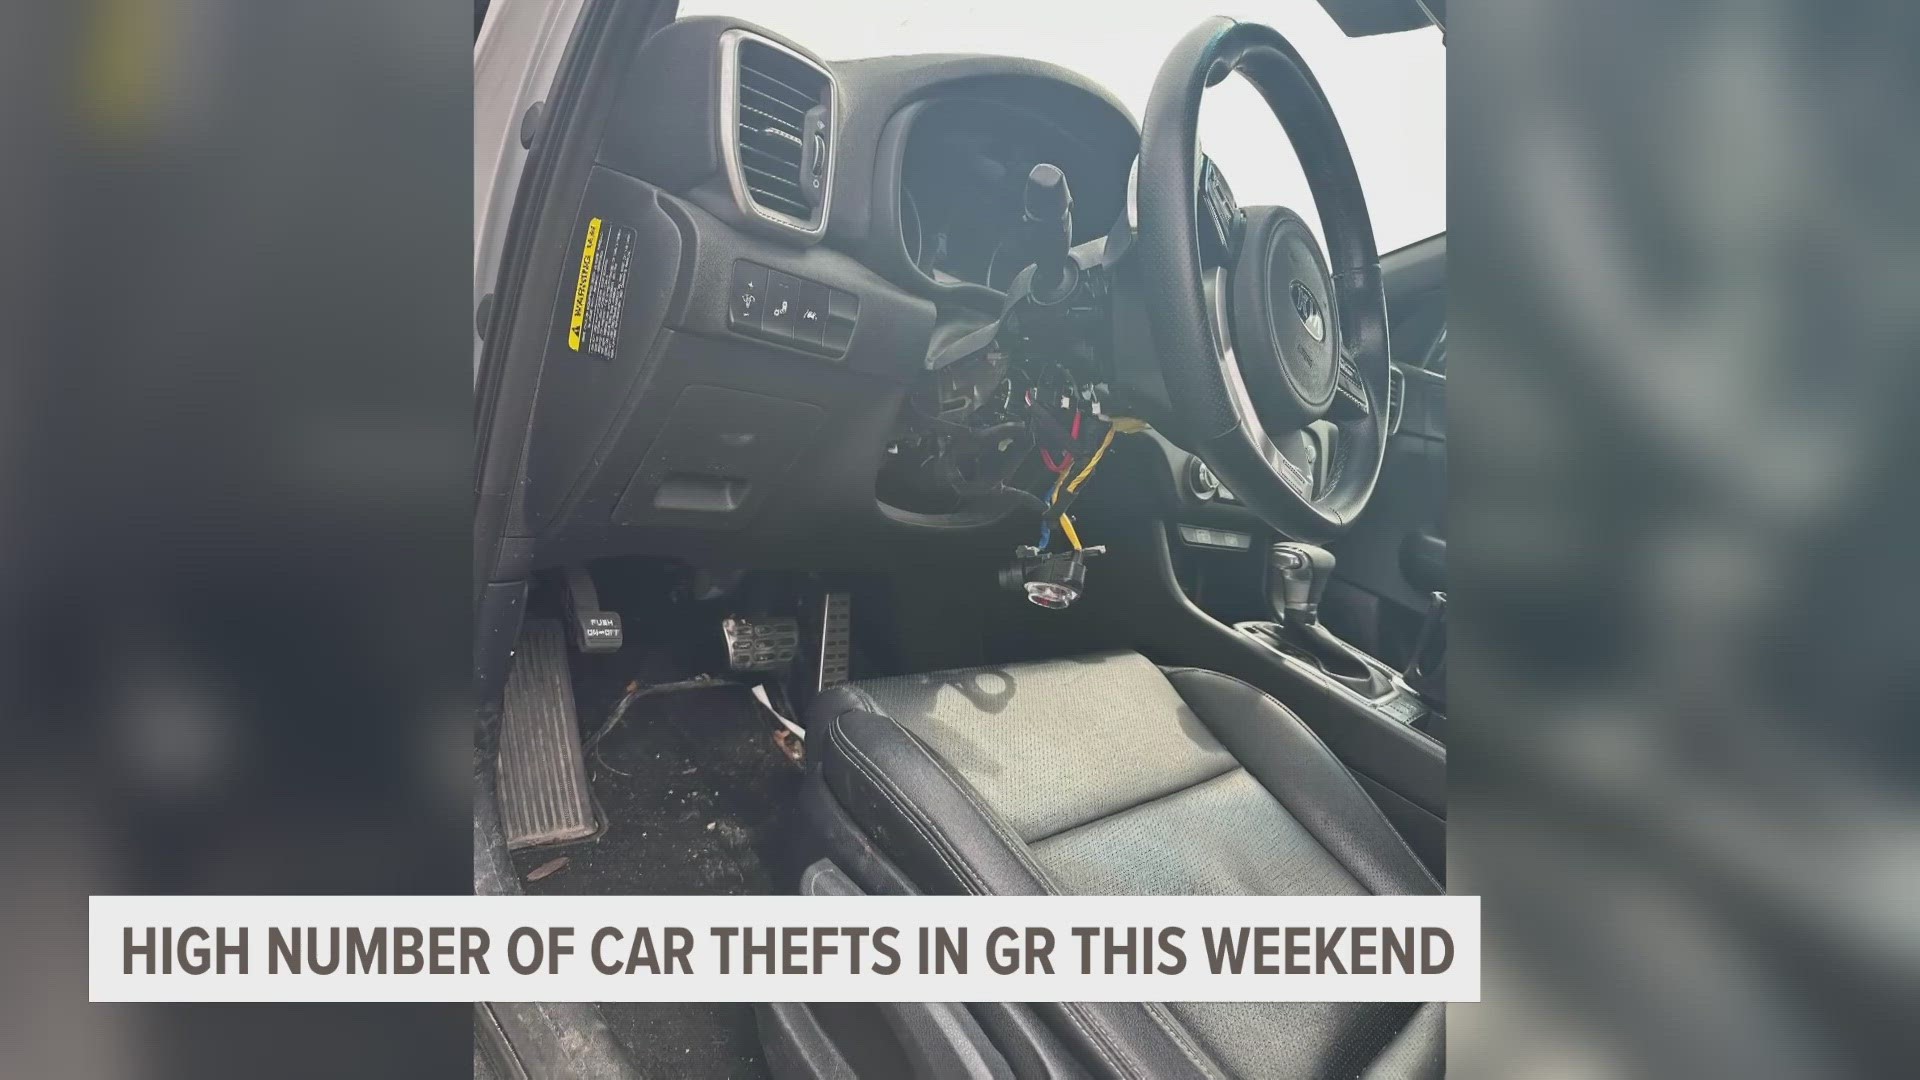 The Grand Rapids Police Department says there were 20 thefts and attempted thefts of Kias and Hyundais since Friday, May 5.